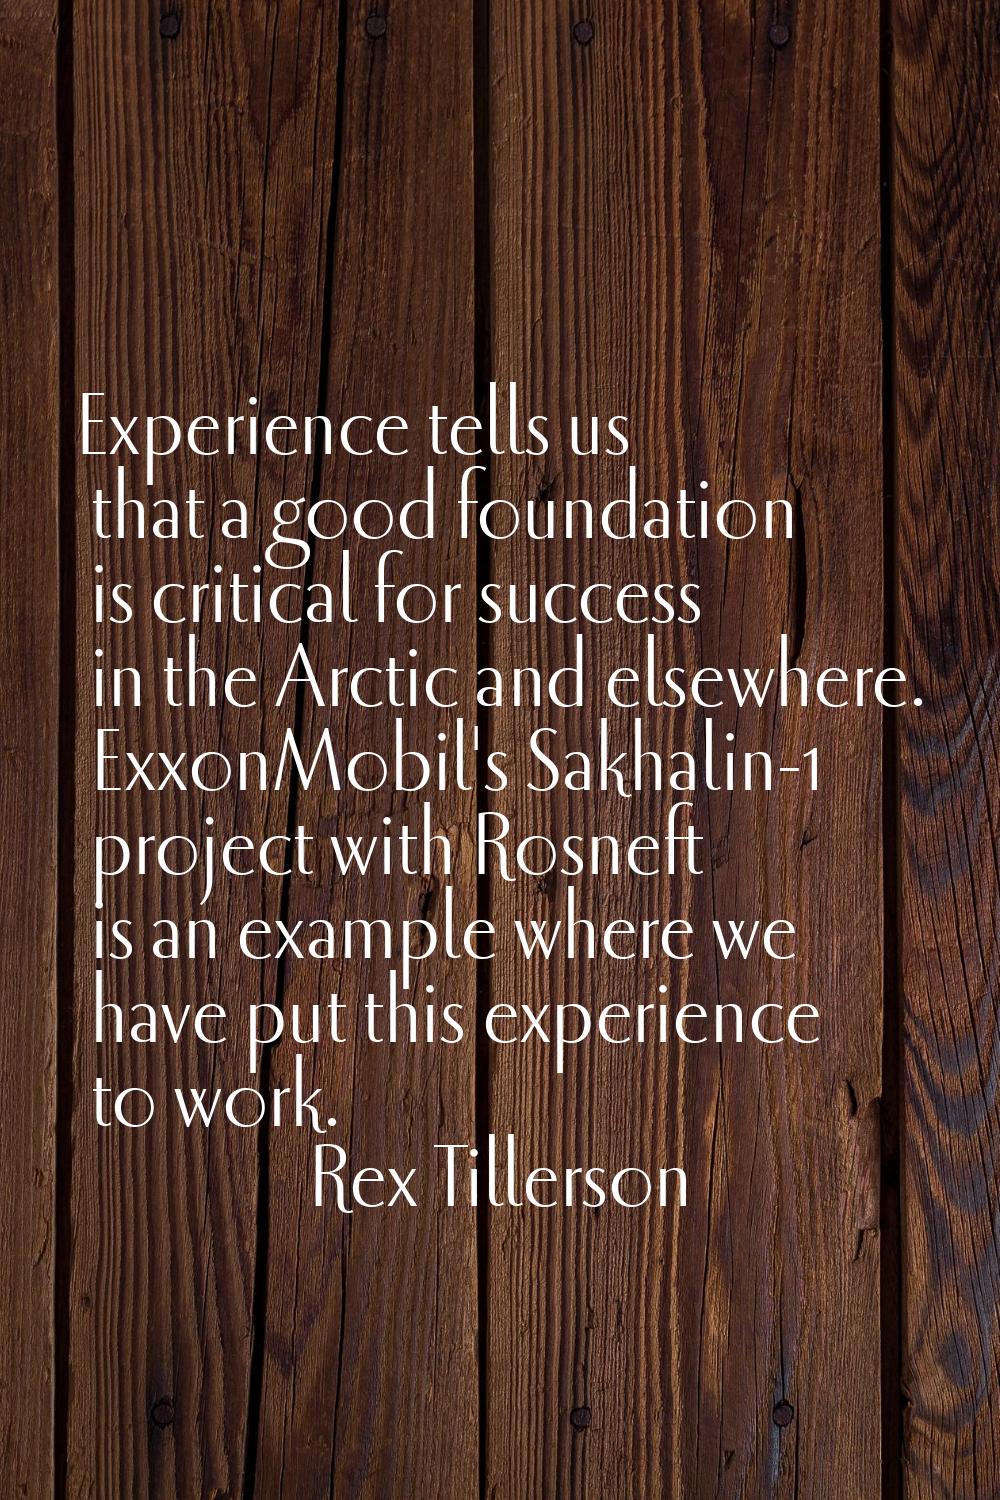 Experience tells us that a good foundation is critical for success in the Arctic and elsewhere. Exx